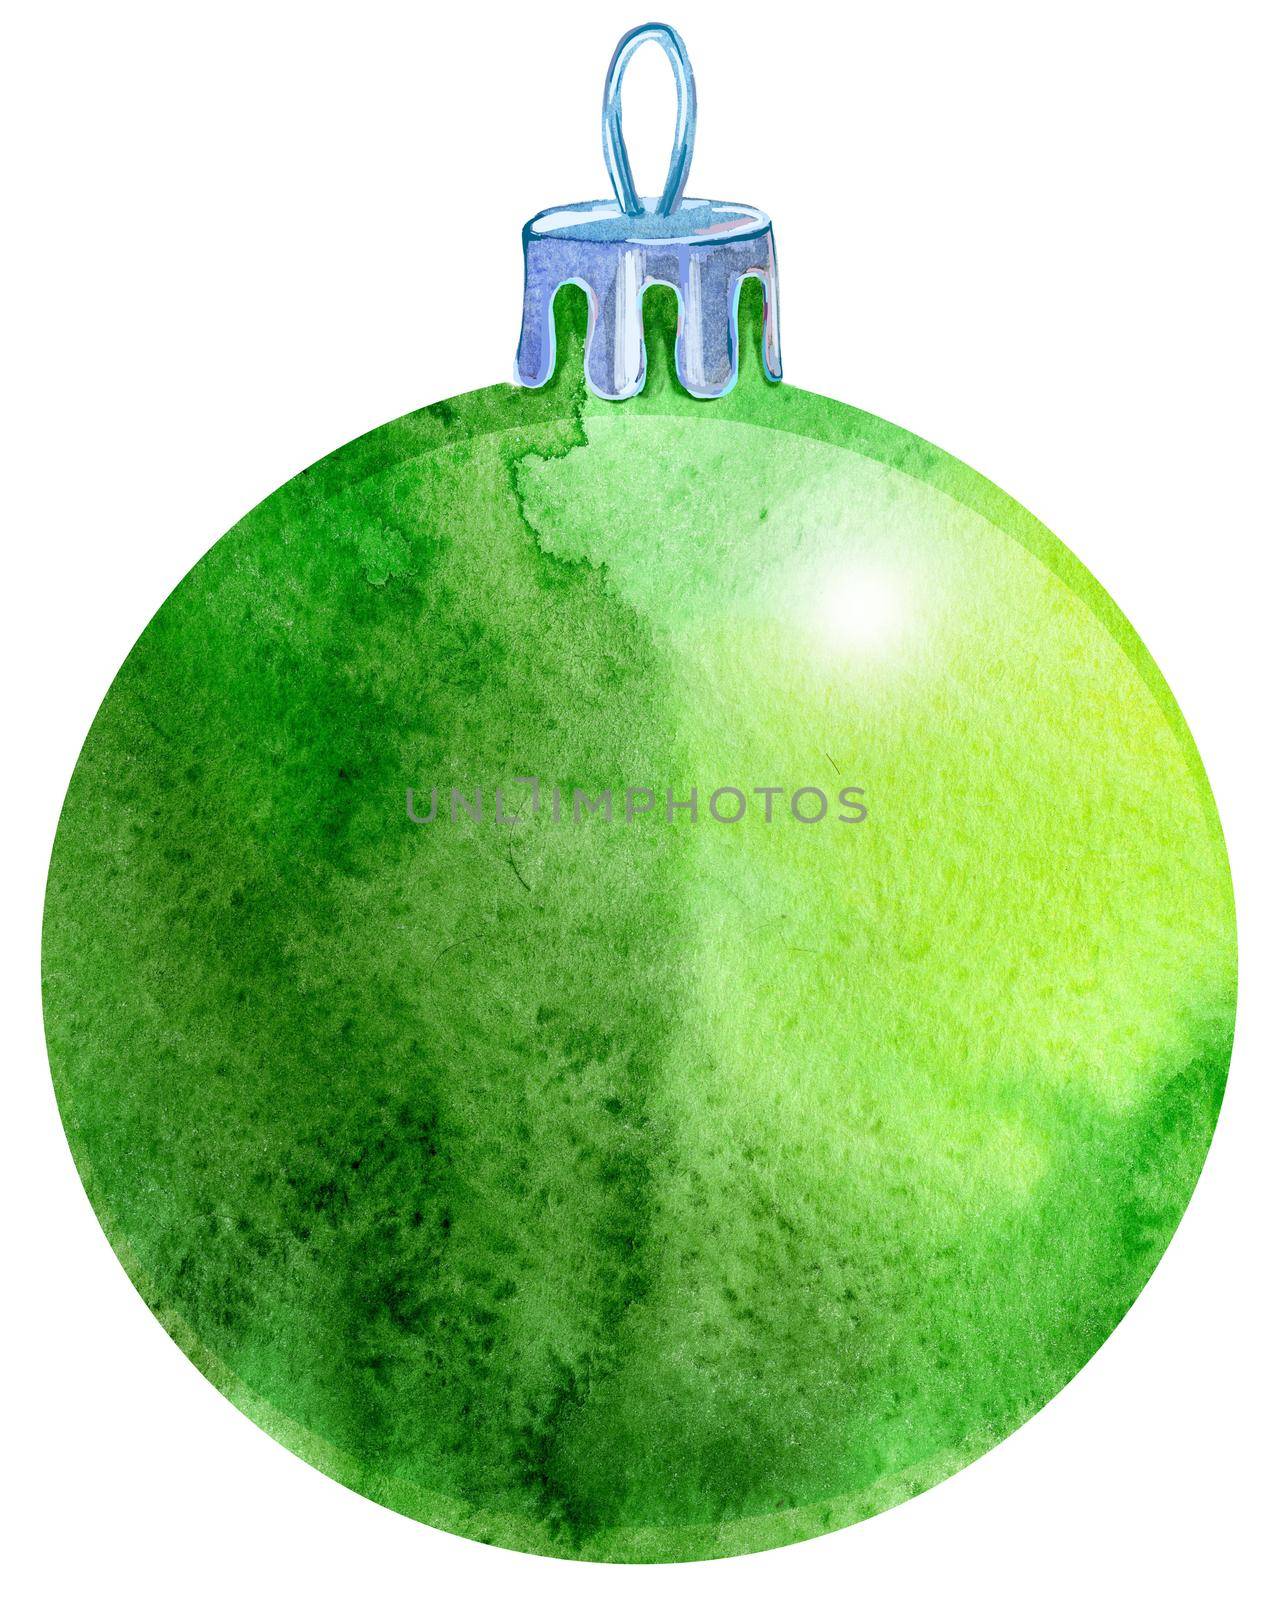 Watercolor Christmas green ball isolated on a white background.